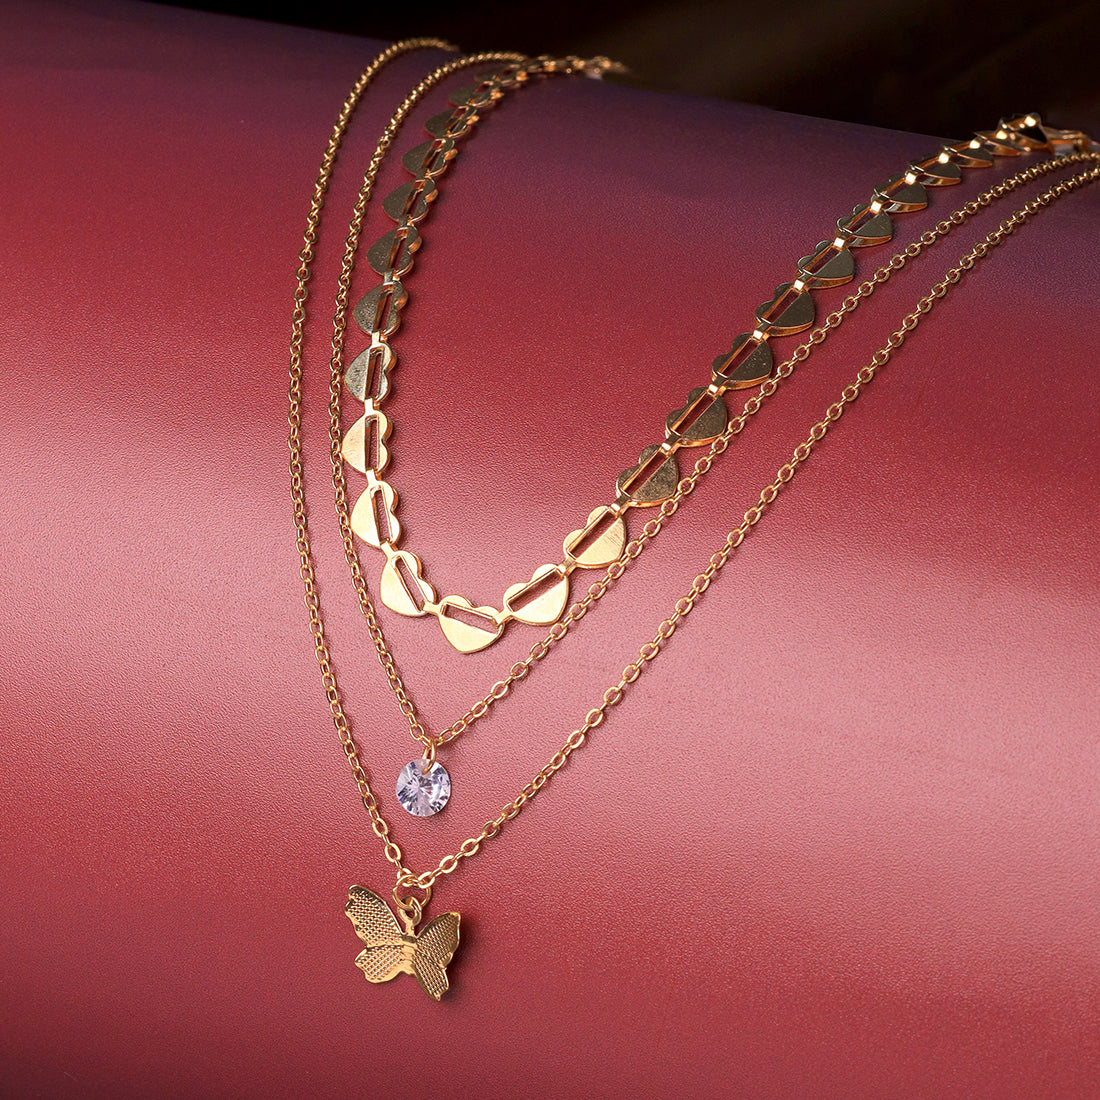 Trendy Three Layered Gold Necklace with Butterfly Pendant , diamonti stone and Chain of Hearts